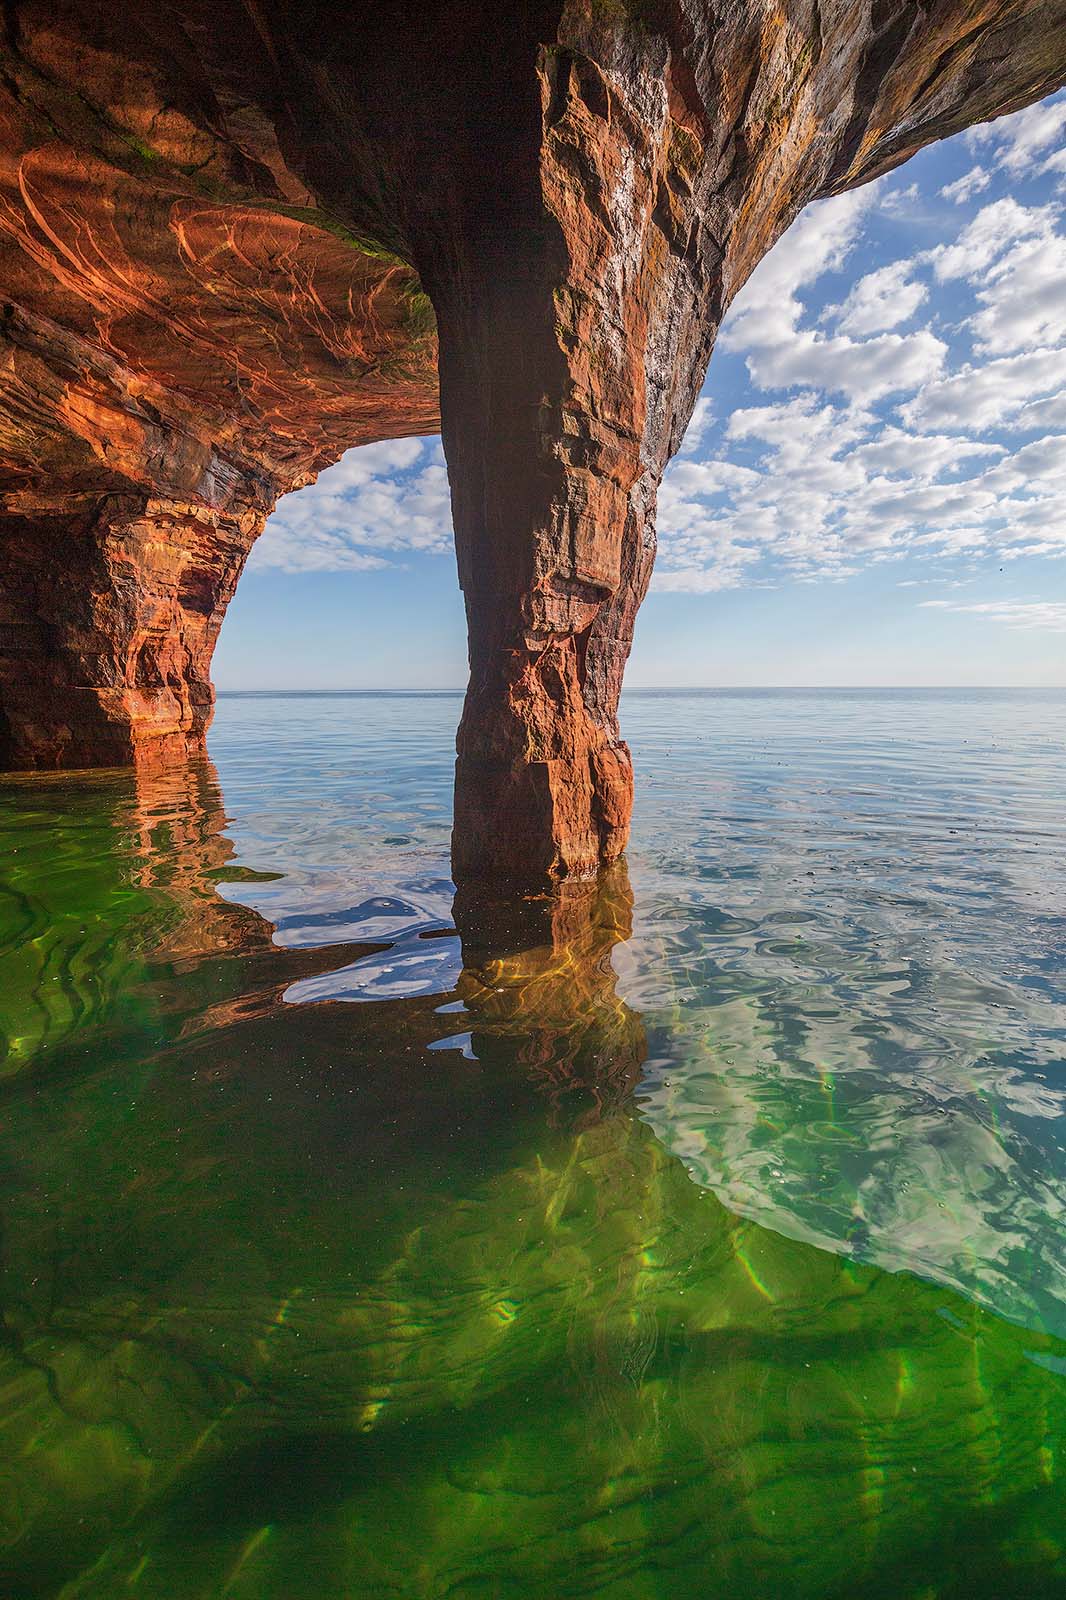 sandstone sea cave with underwater structure in clear water on devil's island in the apostle islands